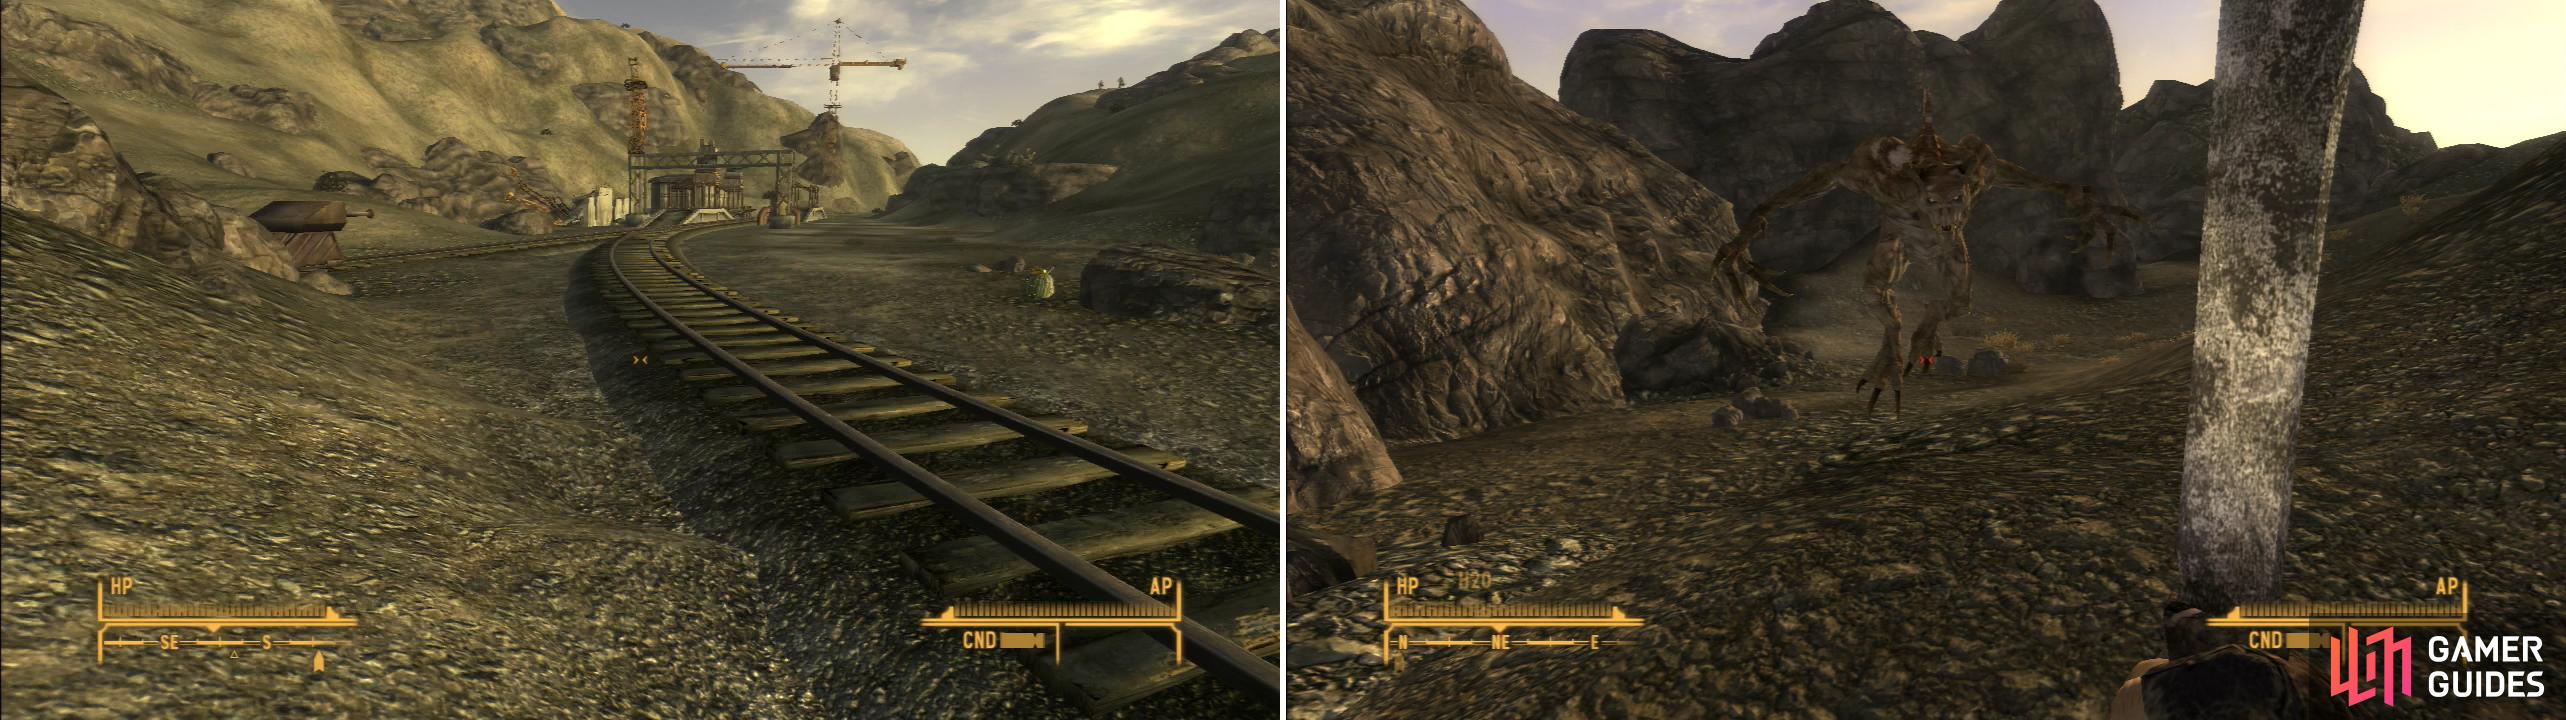 Follow the train tracks to - and past - the Emergency Service Railyard (left). Avoid Primm Pass, however, as it’s guarded by a vicious Blind Deathclaw (right).